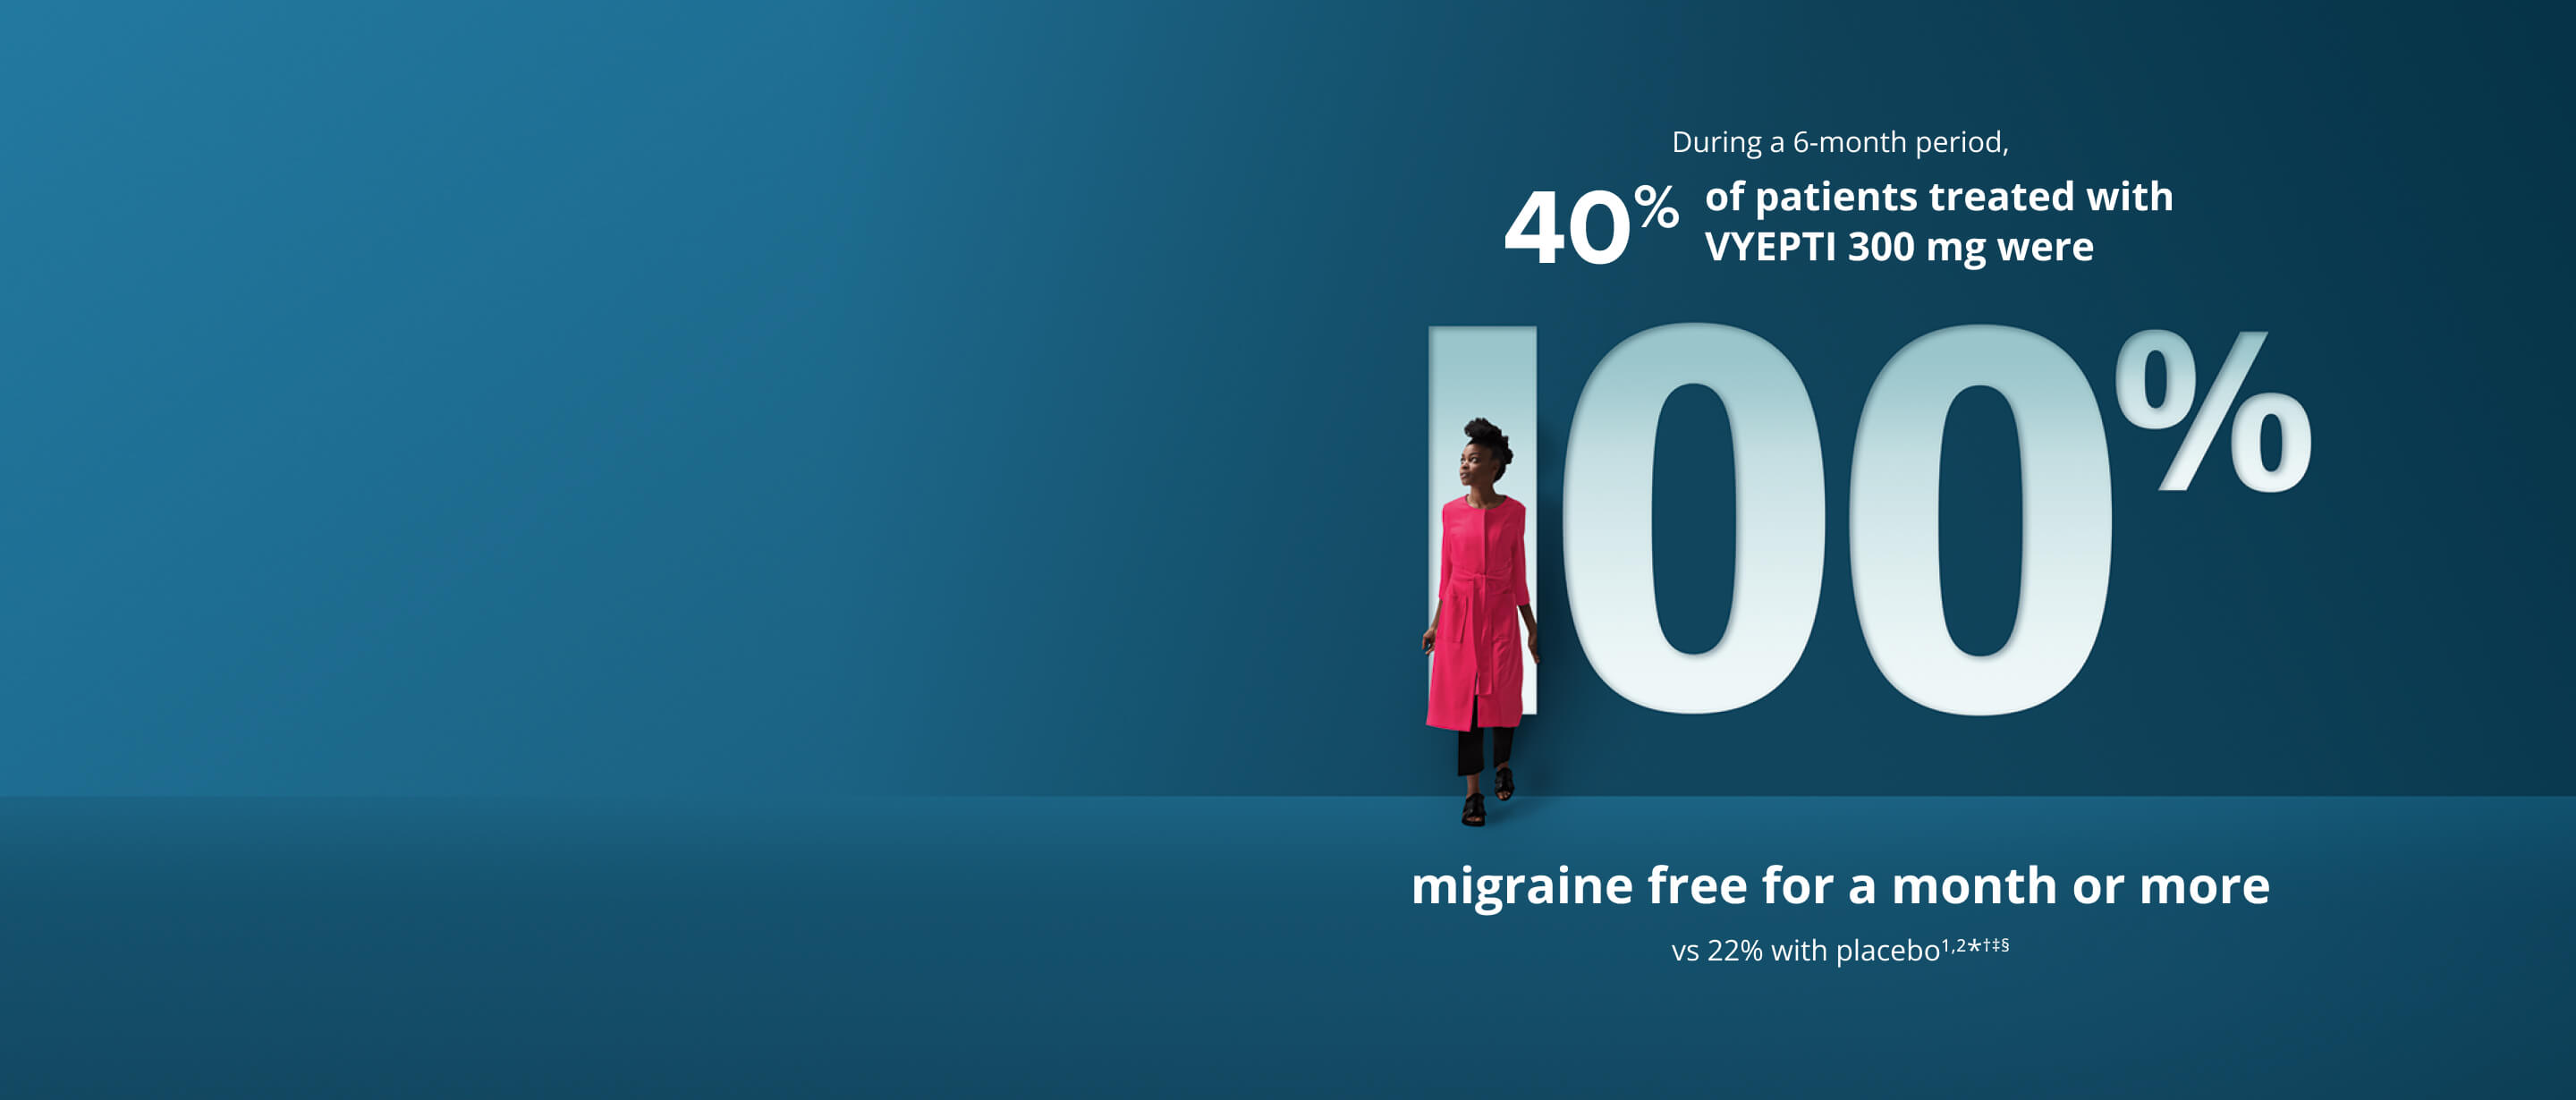 During a 6-month period, 40% of patients treated with VYEPTI 300 mg were 100% migraine free for a month or more vs 22% with placebo